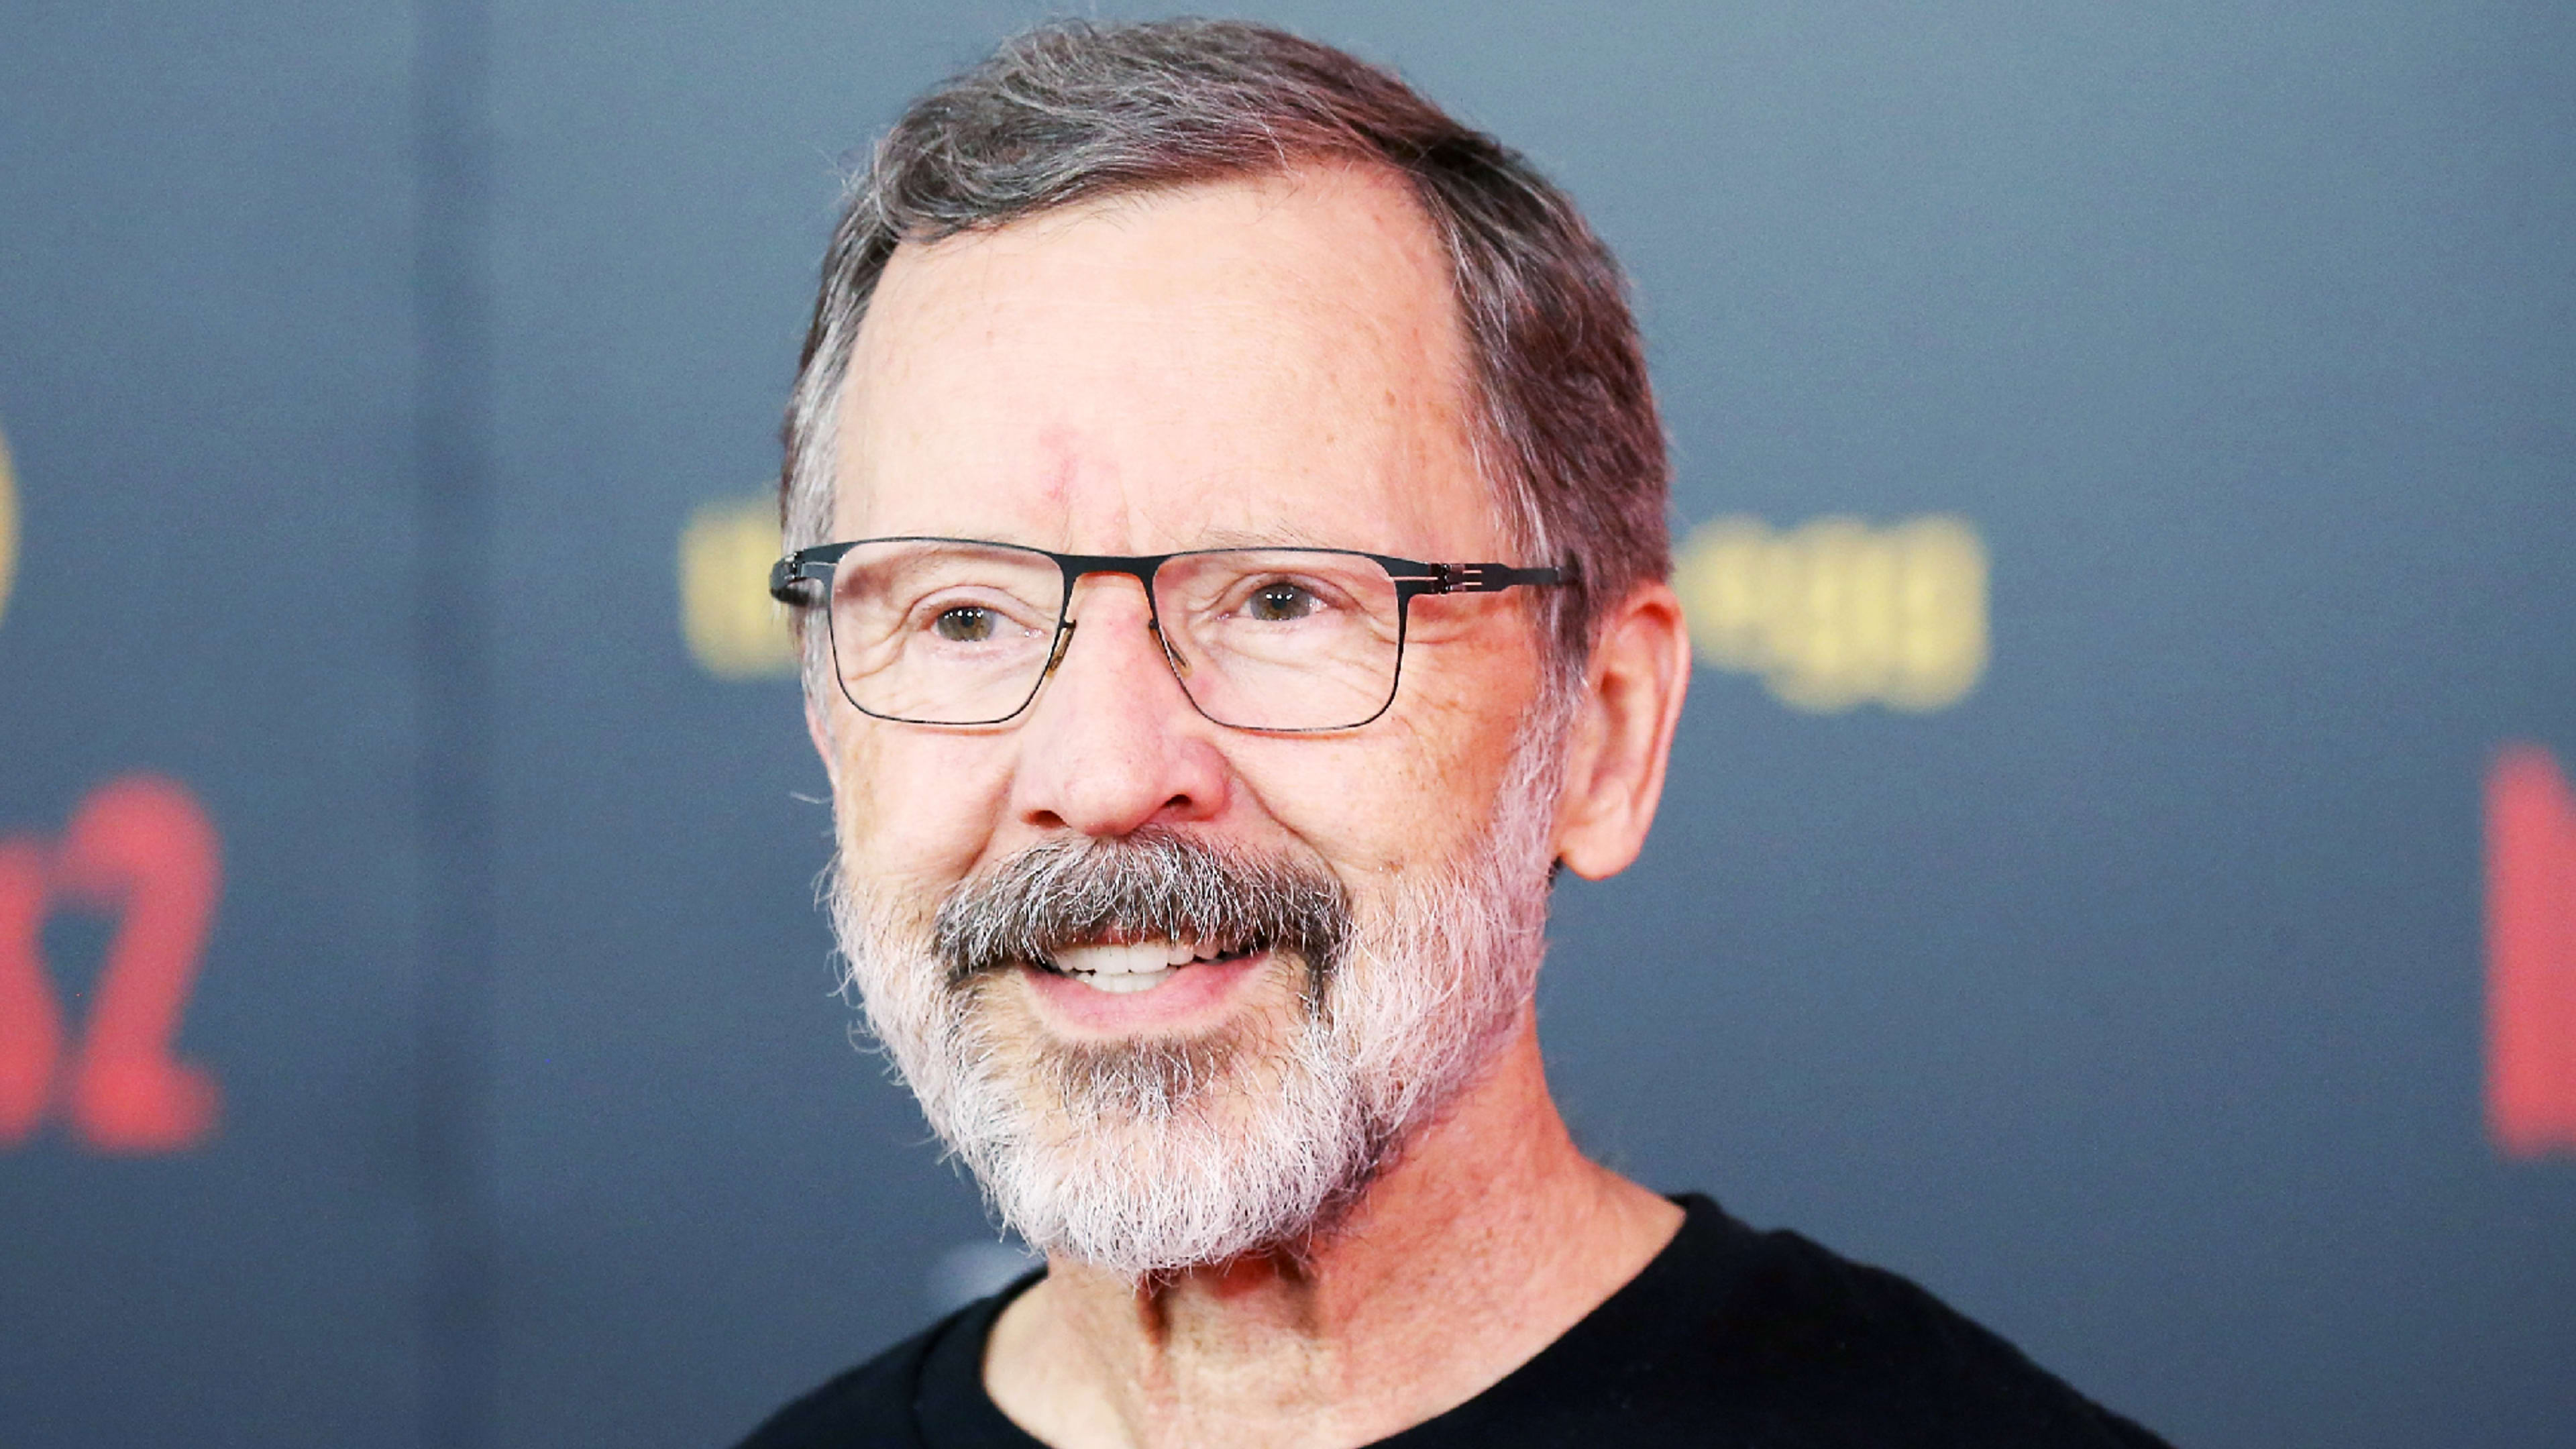 Ed Catmull on how he helped foster creative collaboration at Disney and Pixar